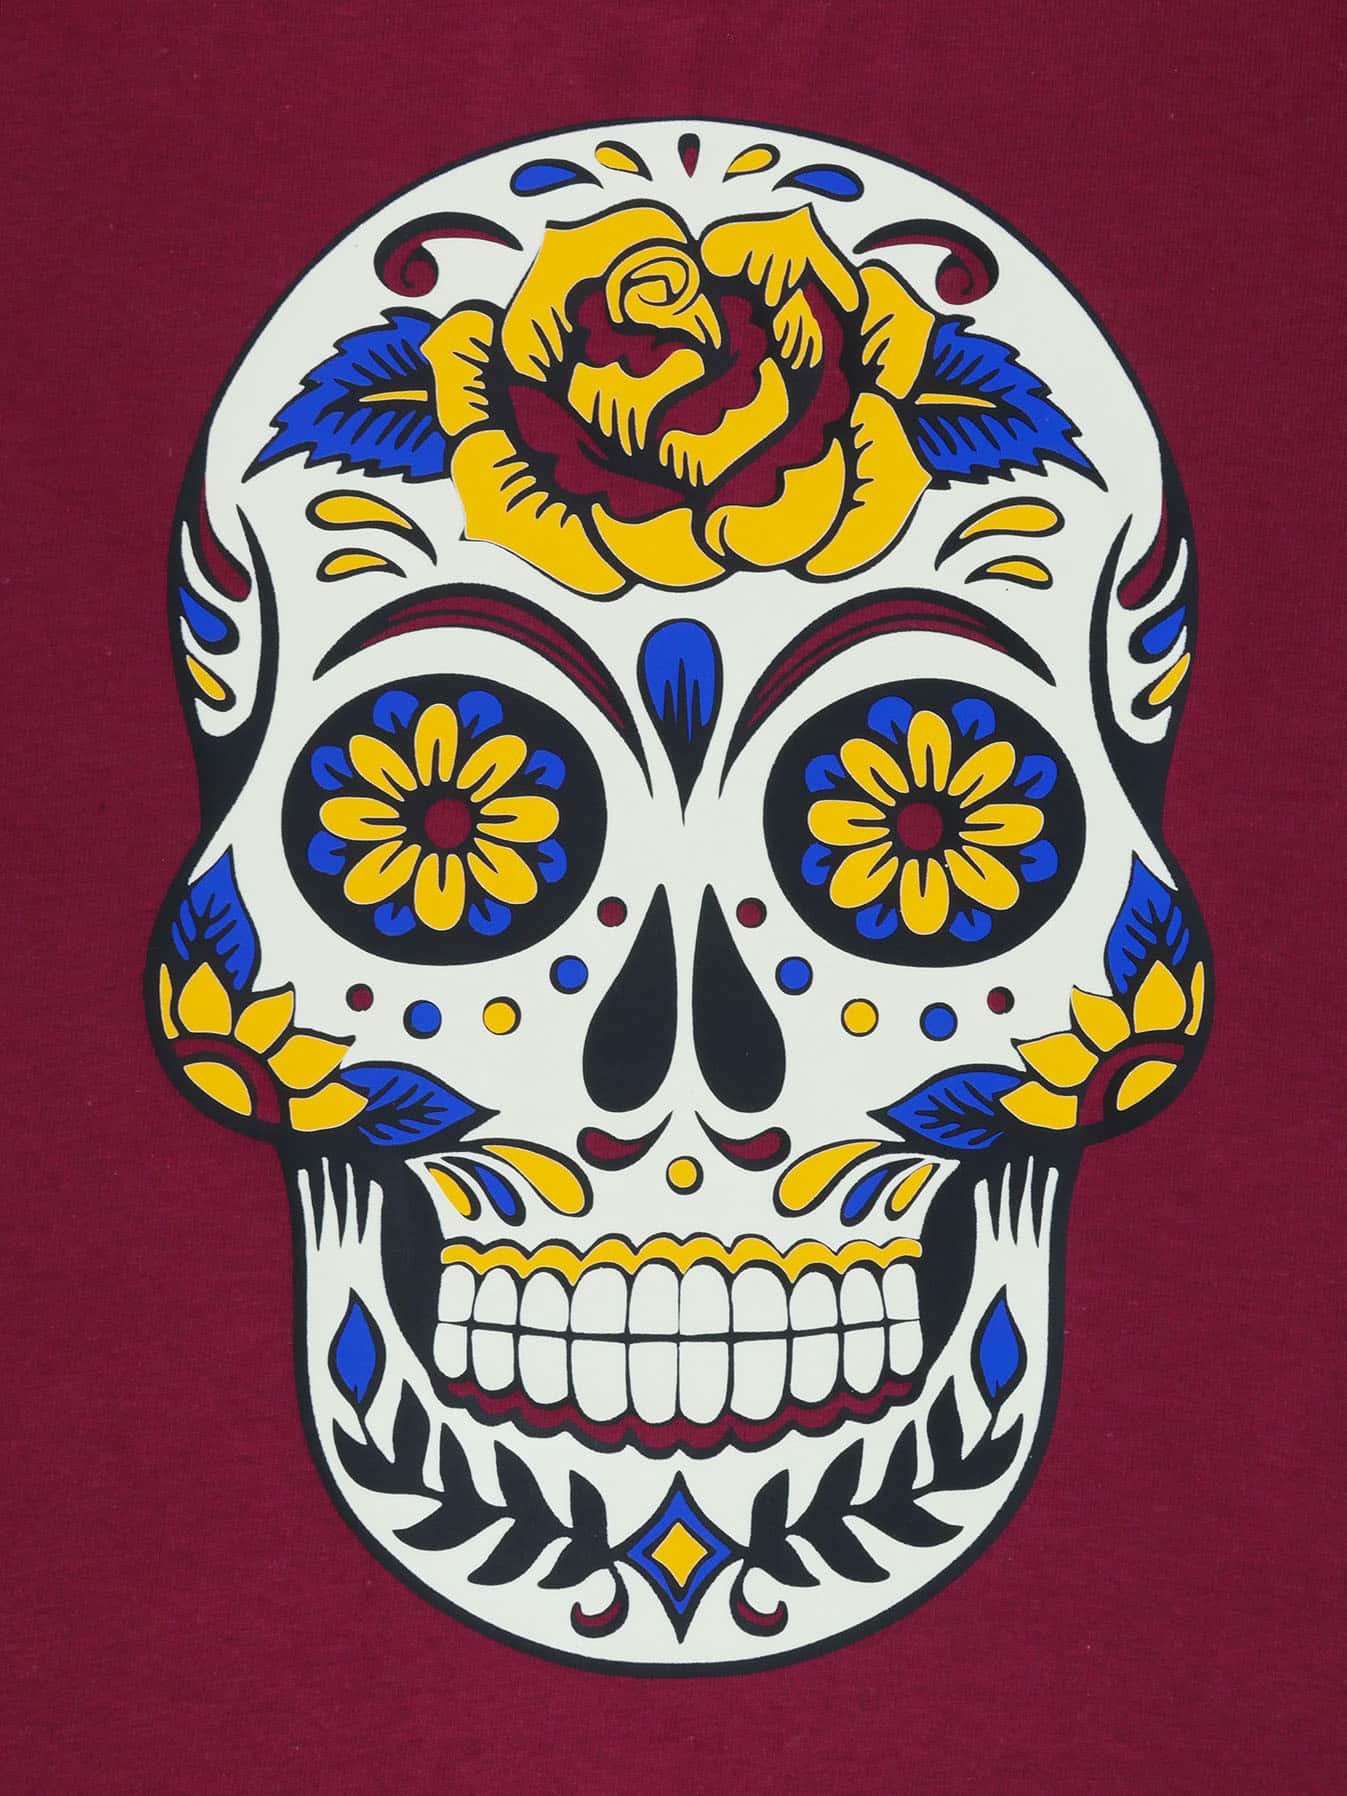 The finished sugar skull in the light